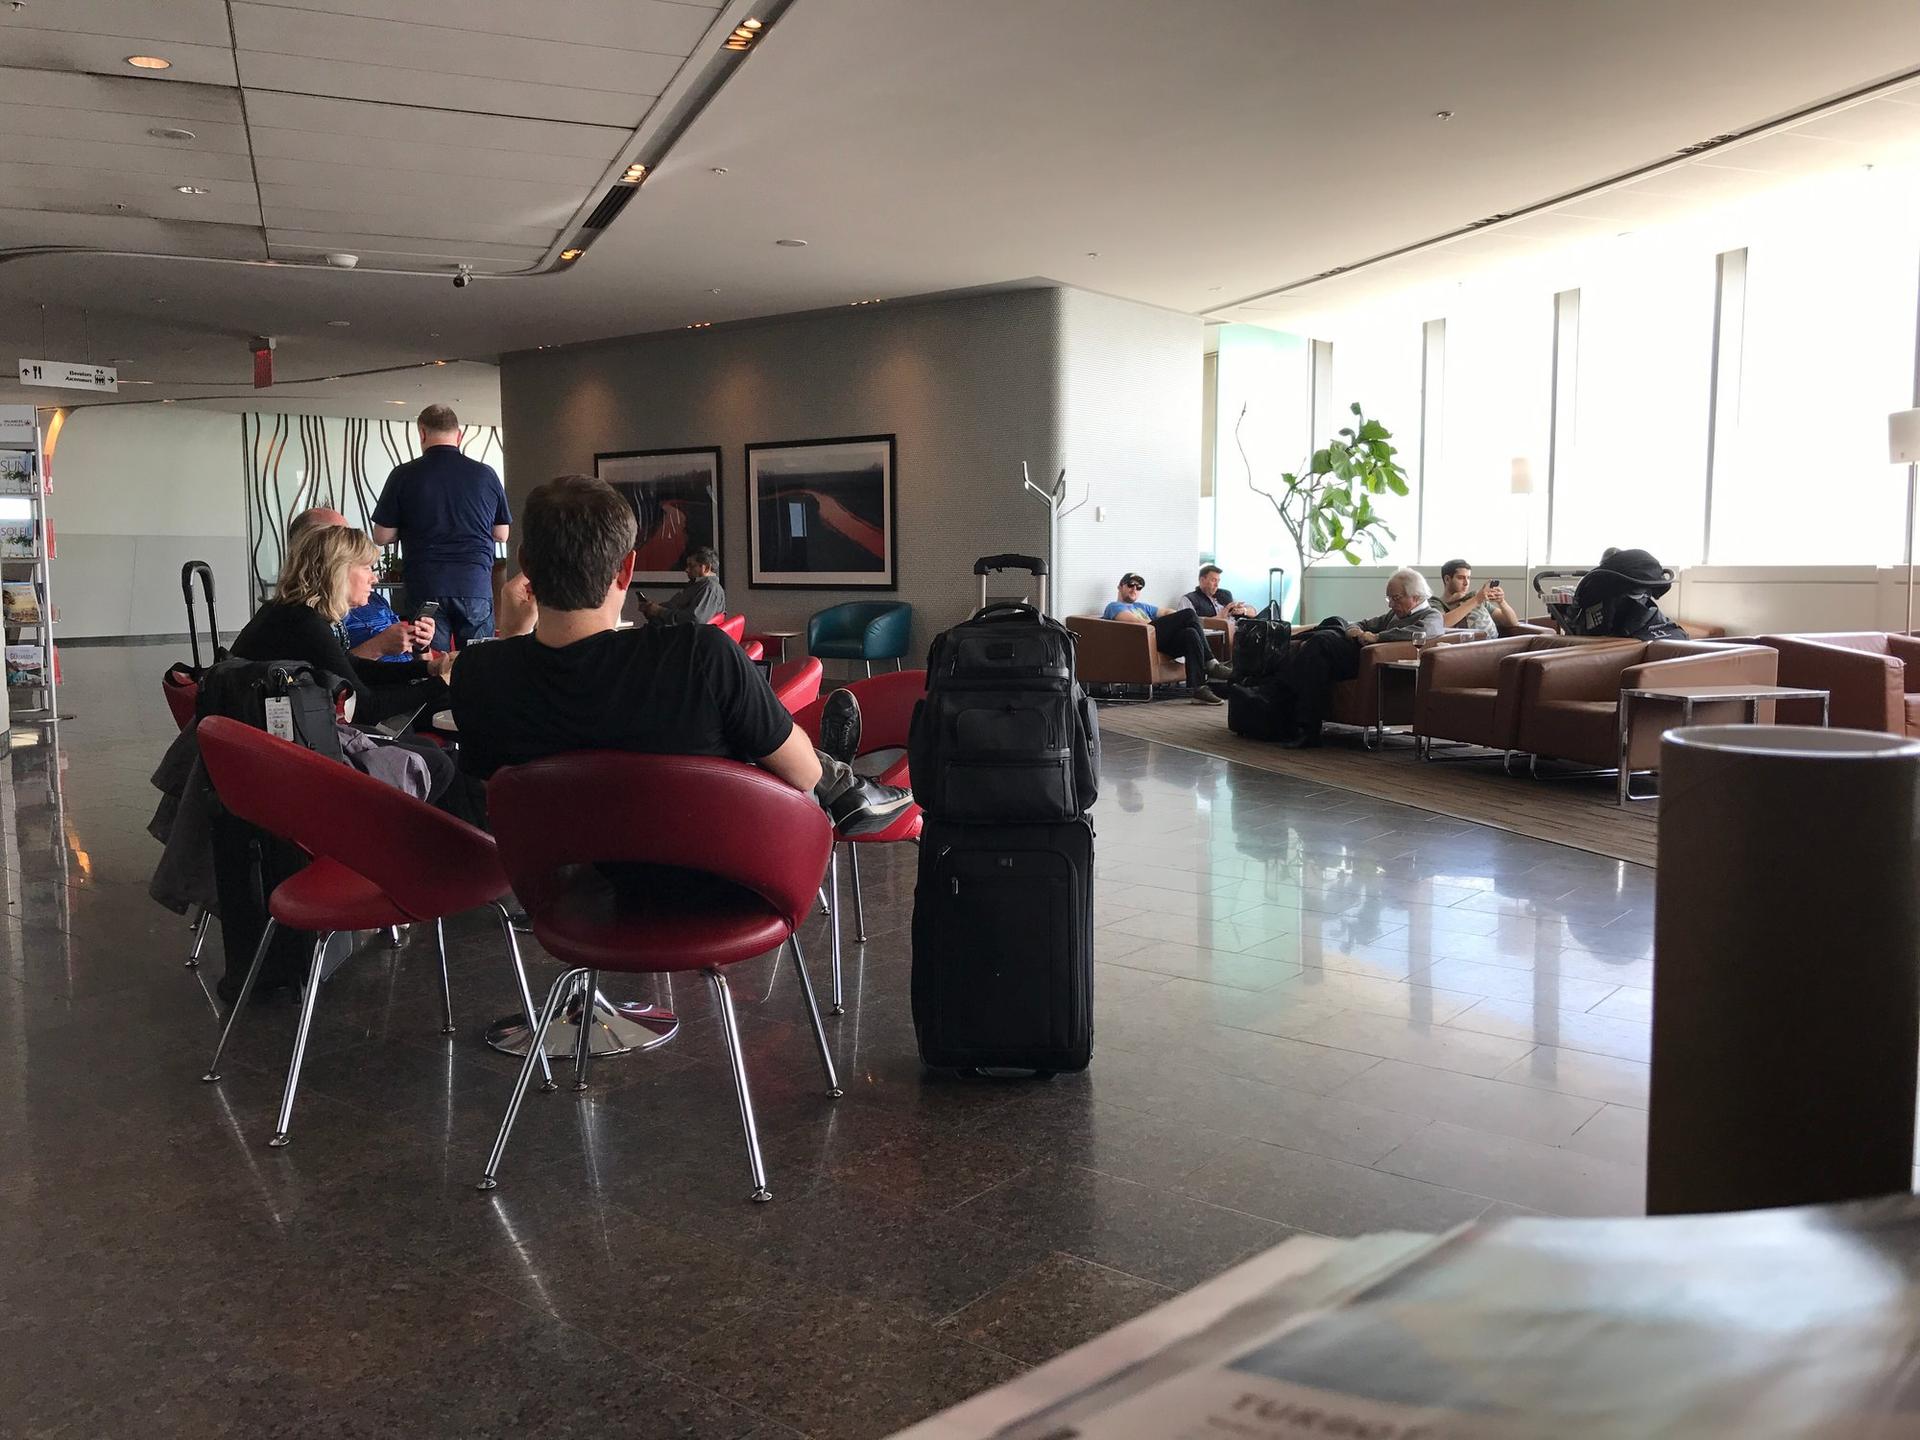 Air Canada Maple Leaf Lounge image 22 of 30